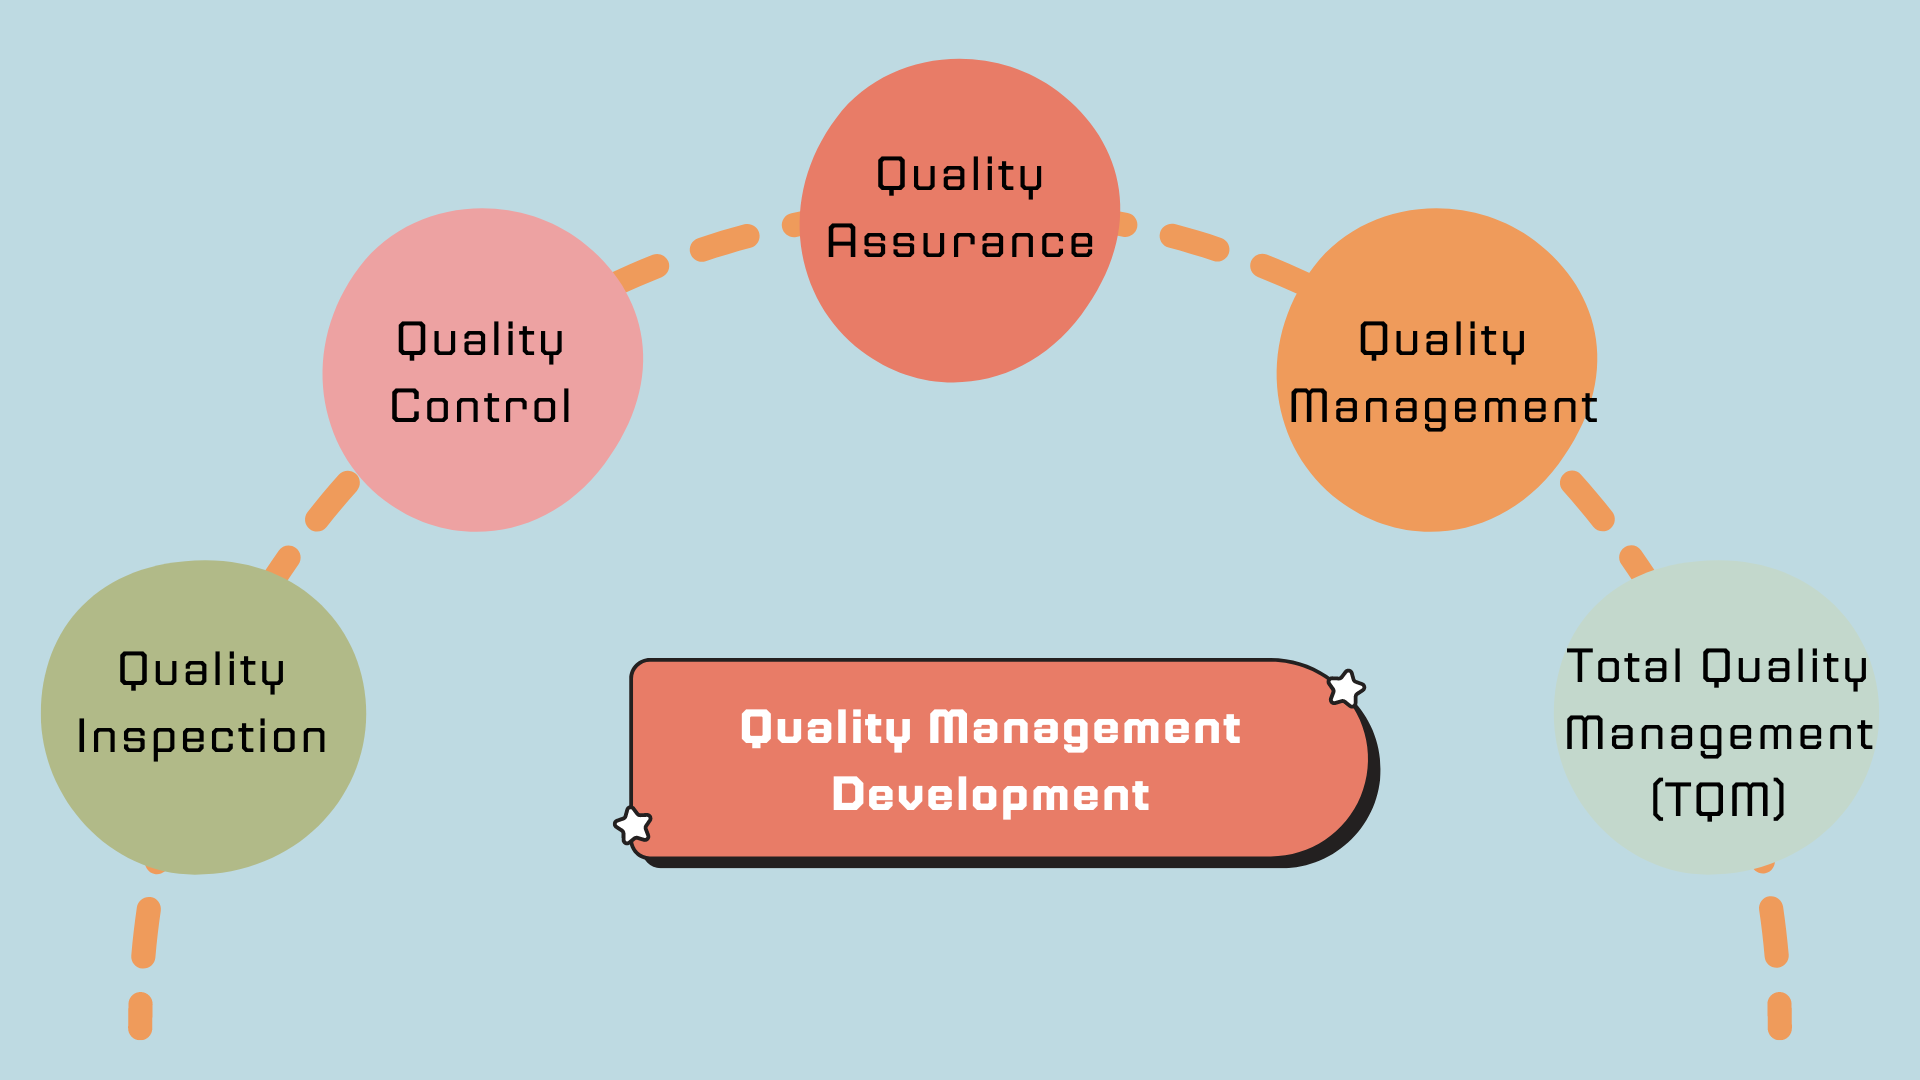 Evolution of Quality Management Systems (QMS)